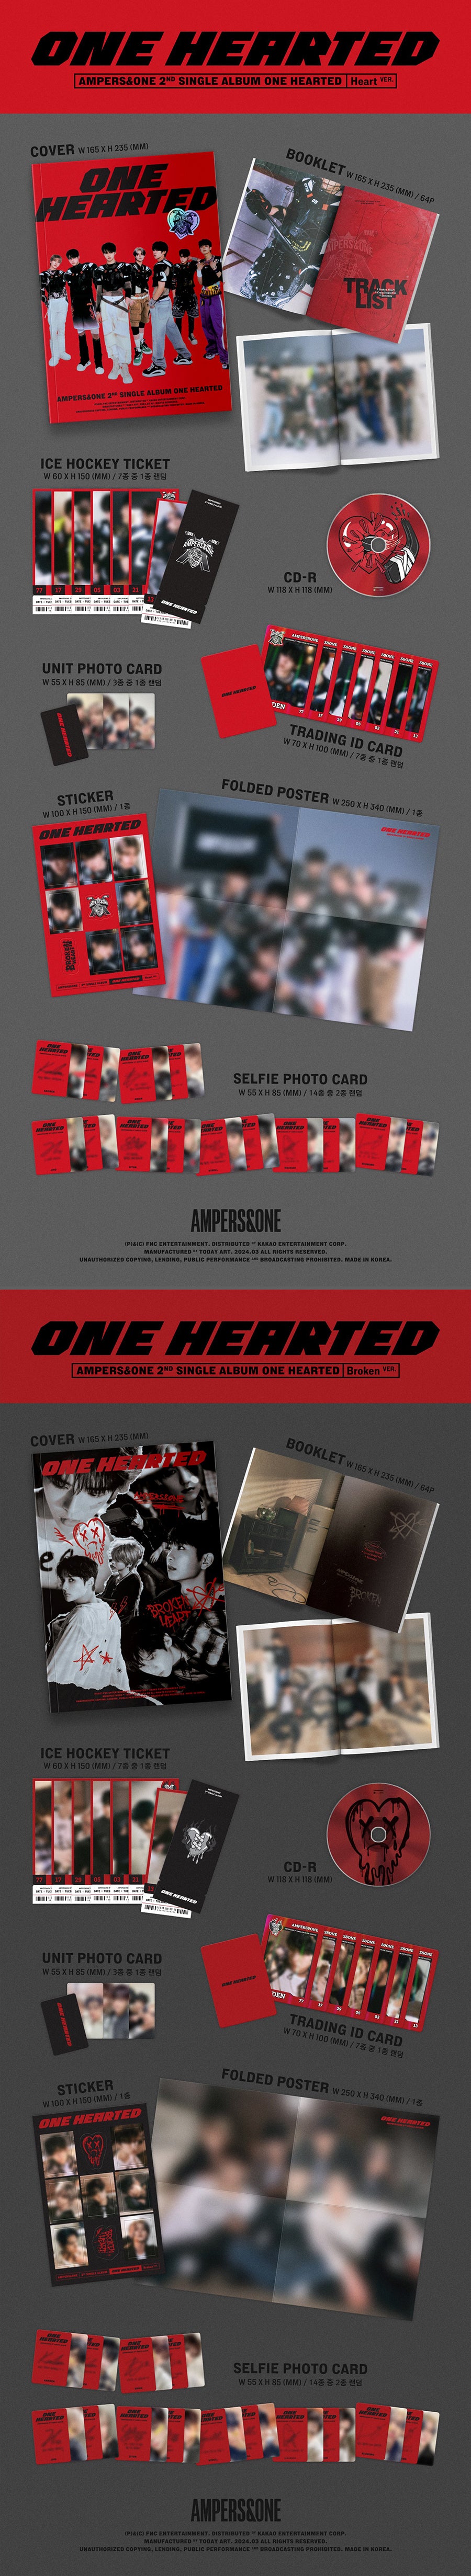 AMPERS&ONE 2ND SINGLE ALBUM 'ONE HEARTED' DETAIL